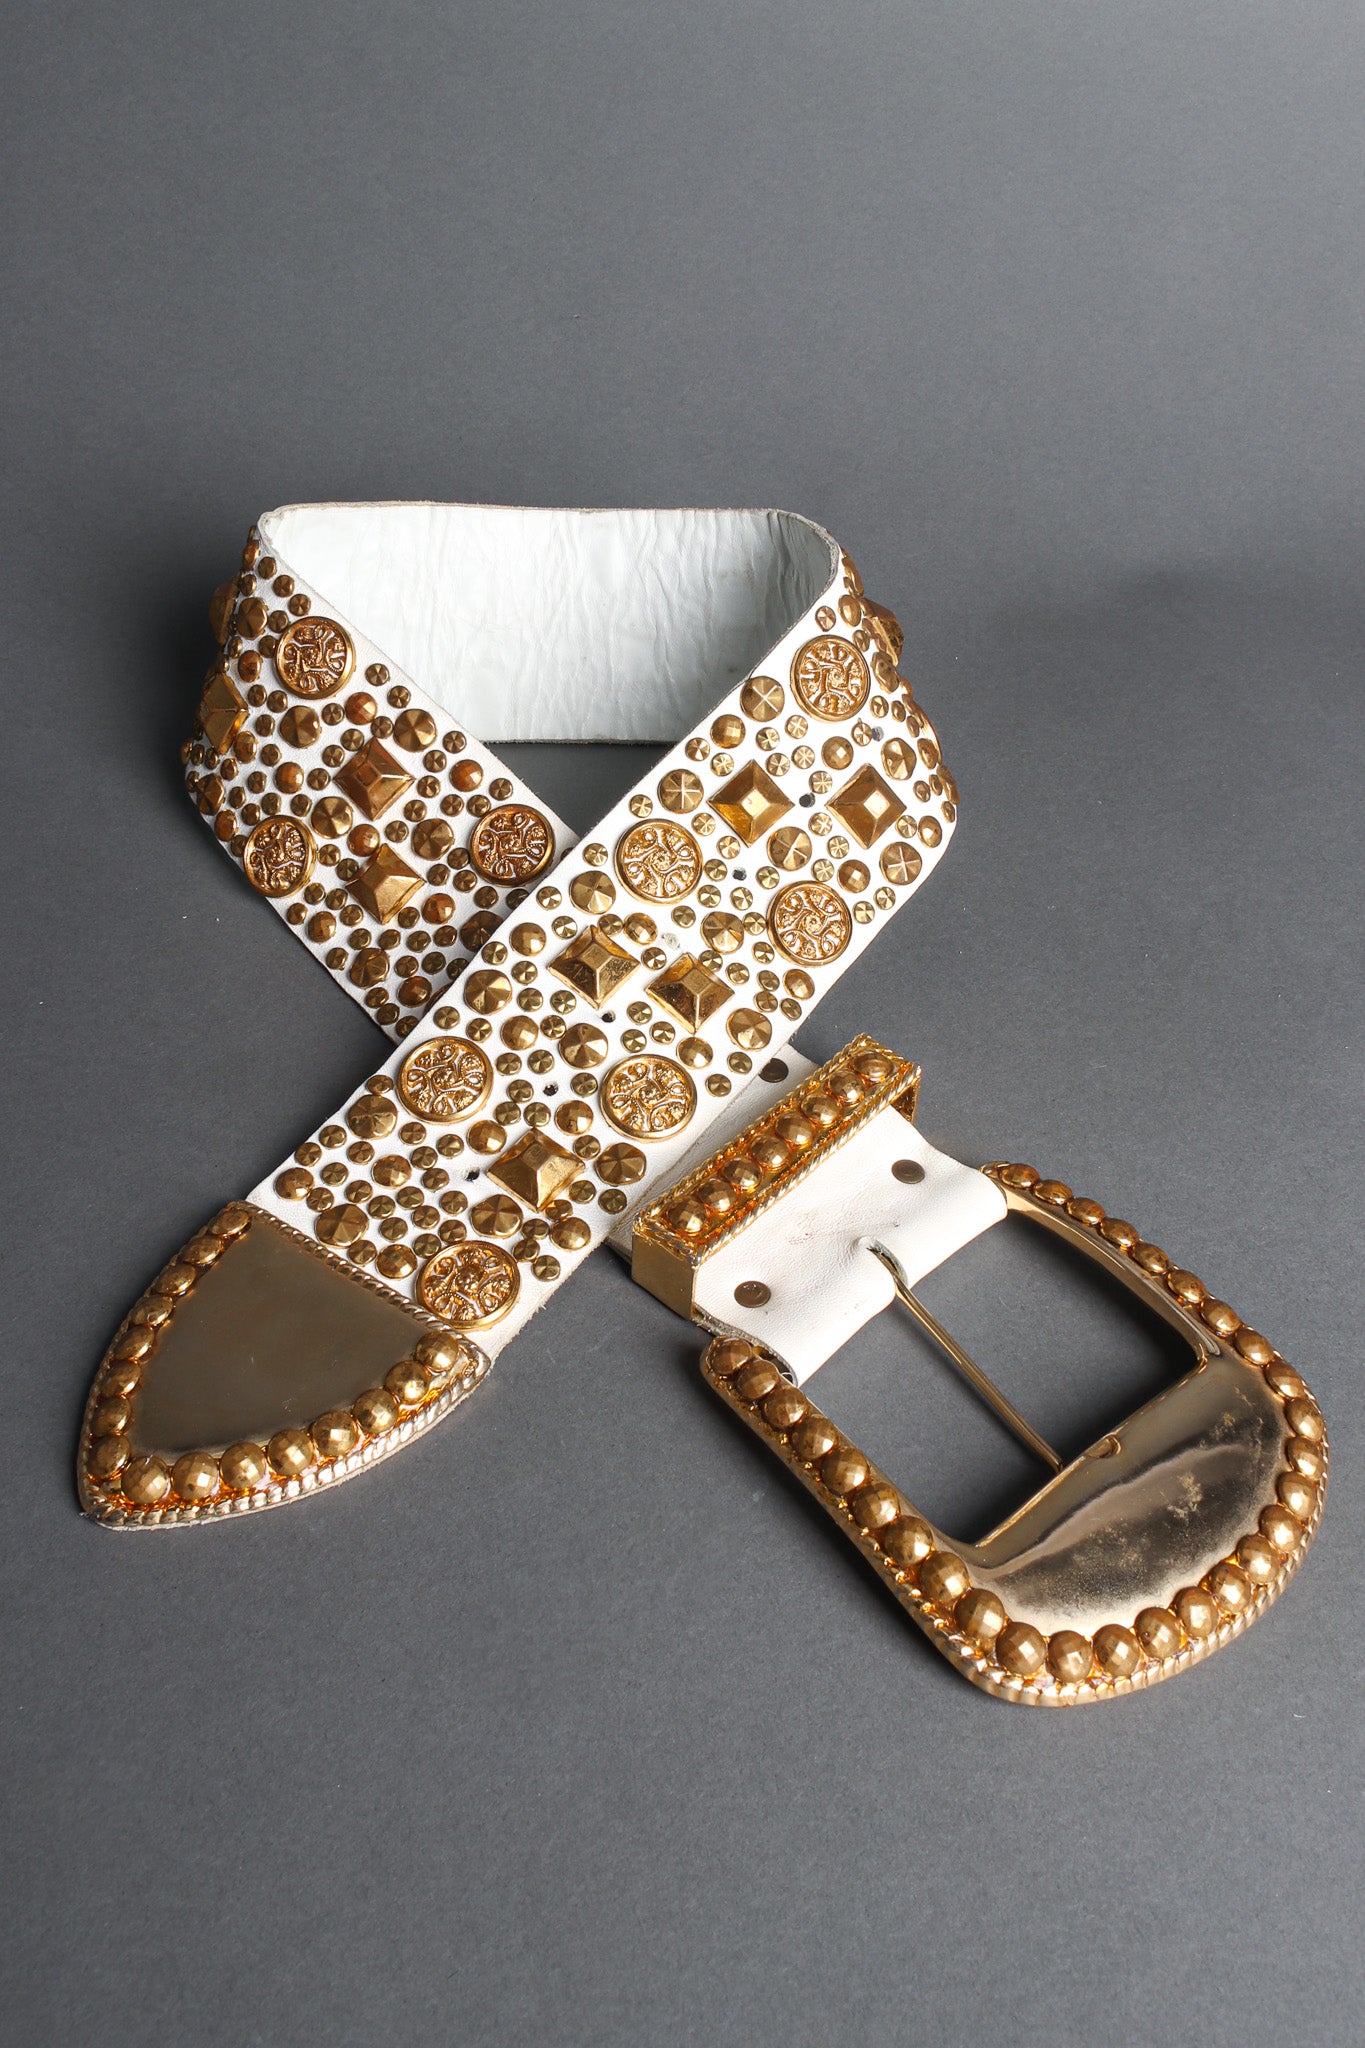 Studded leather belt with assorted gold studs by Michael Morrison flat lay @recessla